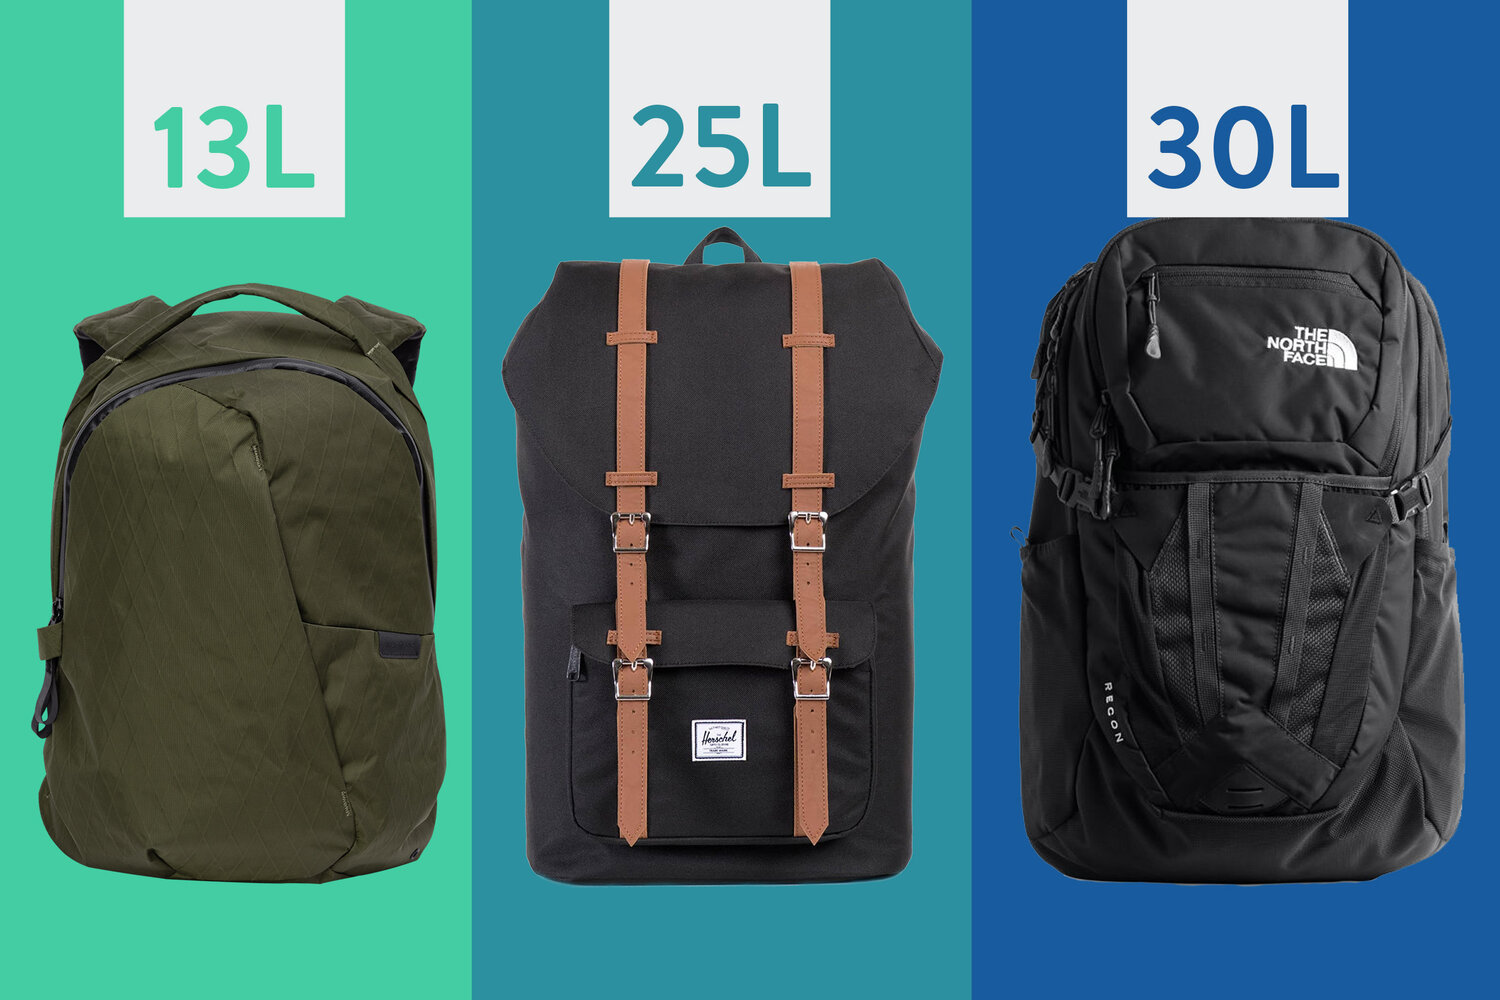 Prestige Sideways Diplomat Ultimate Backpack Size Guide - What Size Backpack Do I Need? | Backpackies